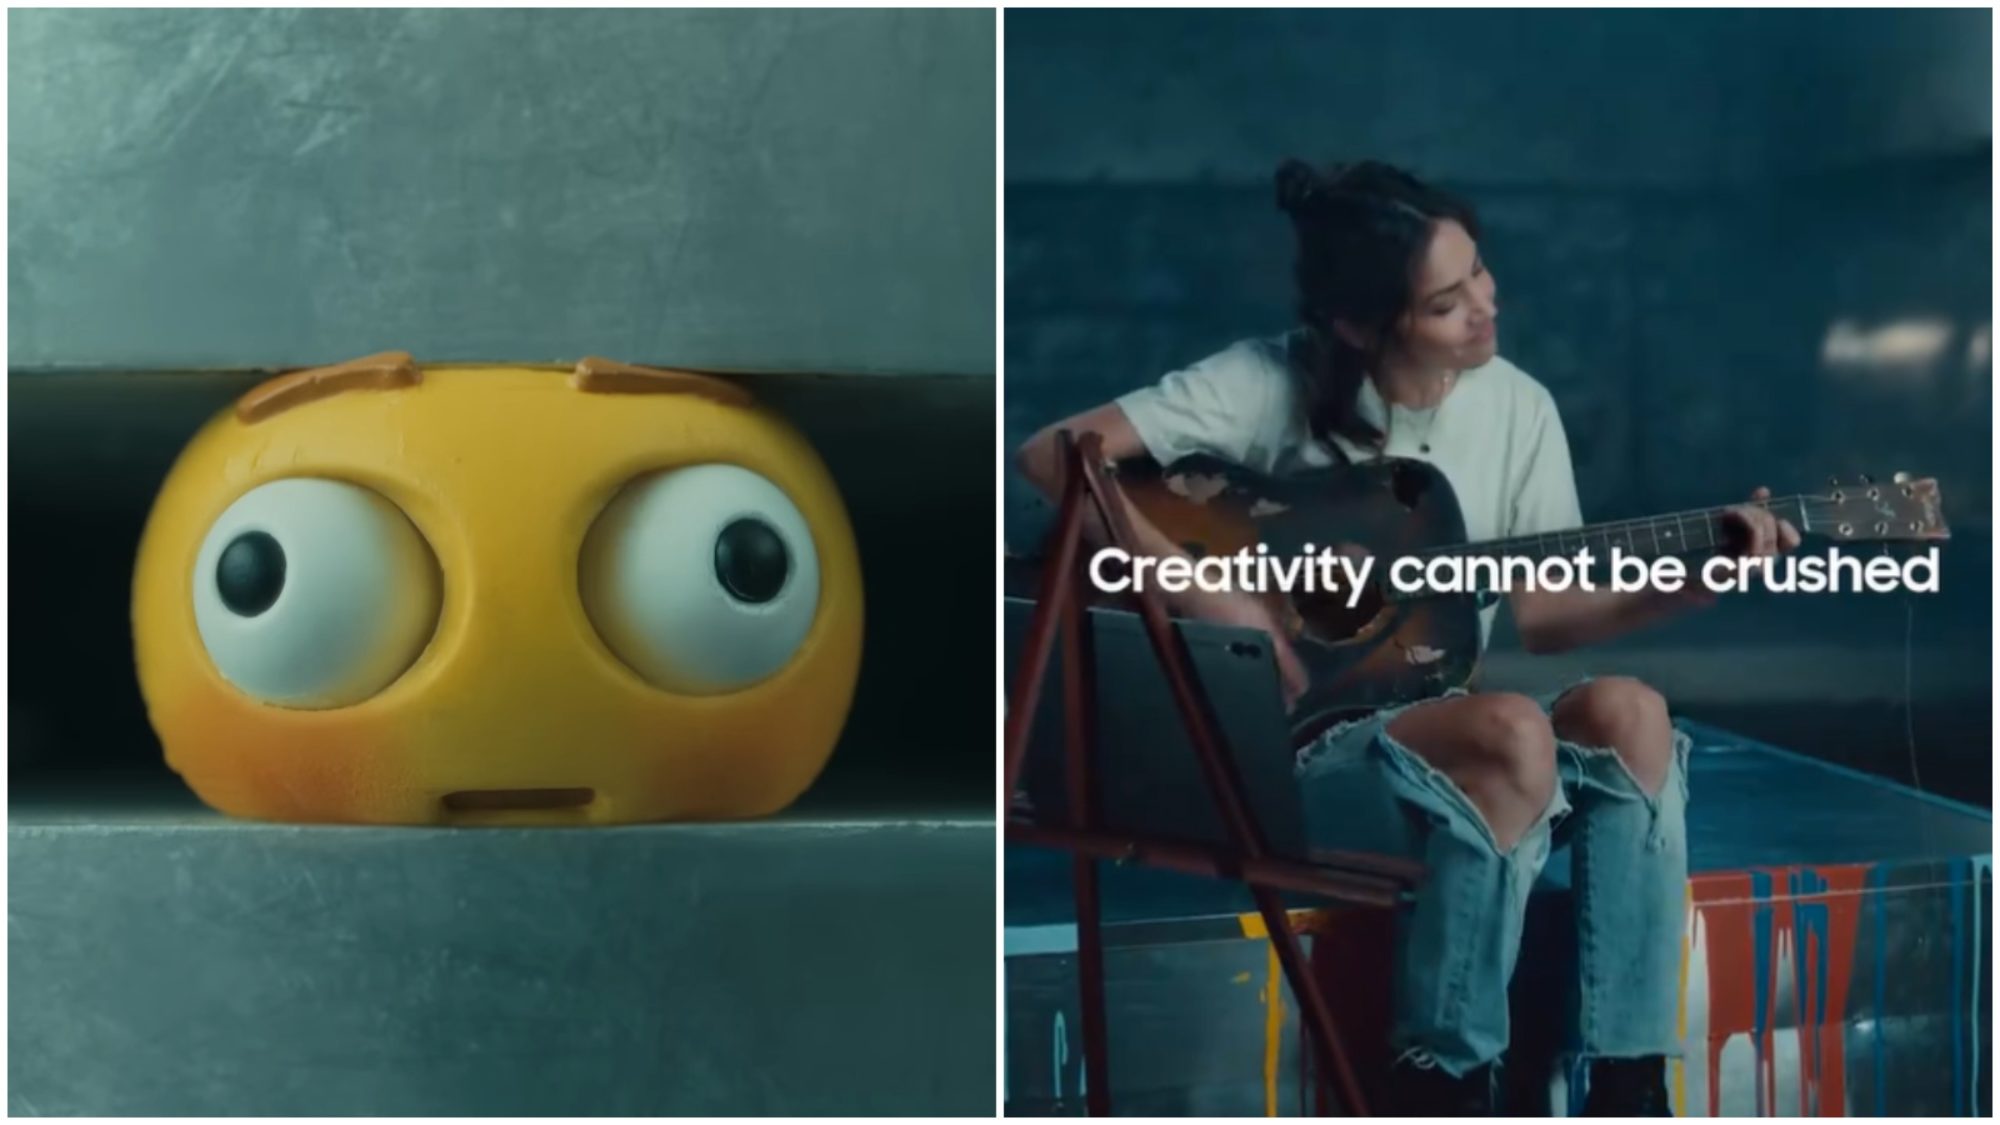 Samsung Tried to "Crush" Apple Over Ad But Let Its AI Show (VIDEO)